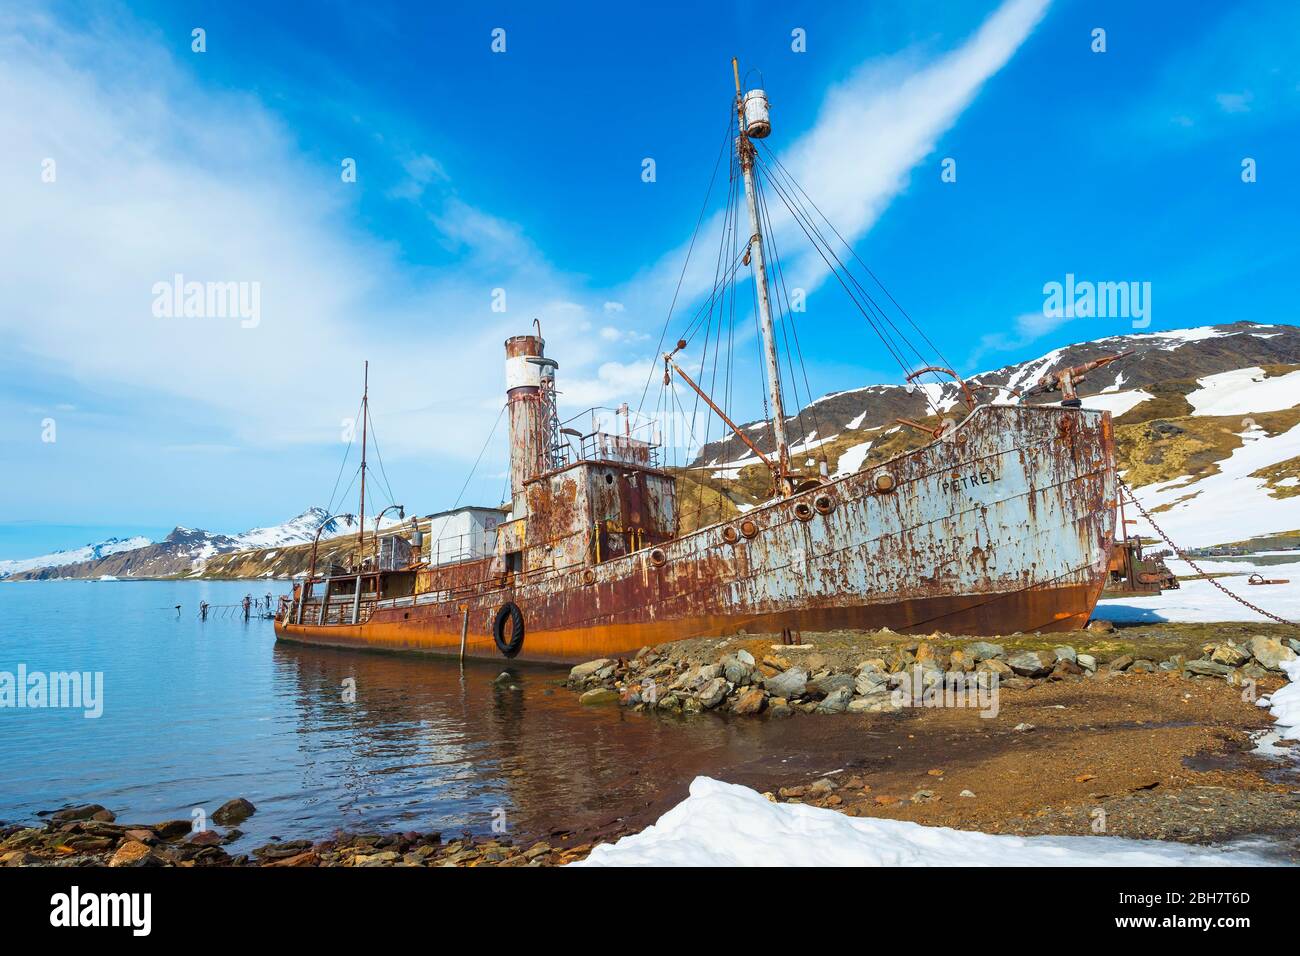 Wreck of the whaler ship Petrel, Former Grytviken whaling station, King Edward Cove, South Georgia, South Georgia and the Sandwich Islands, Antarctica Stock Photo